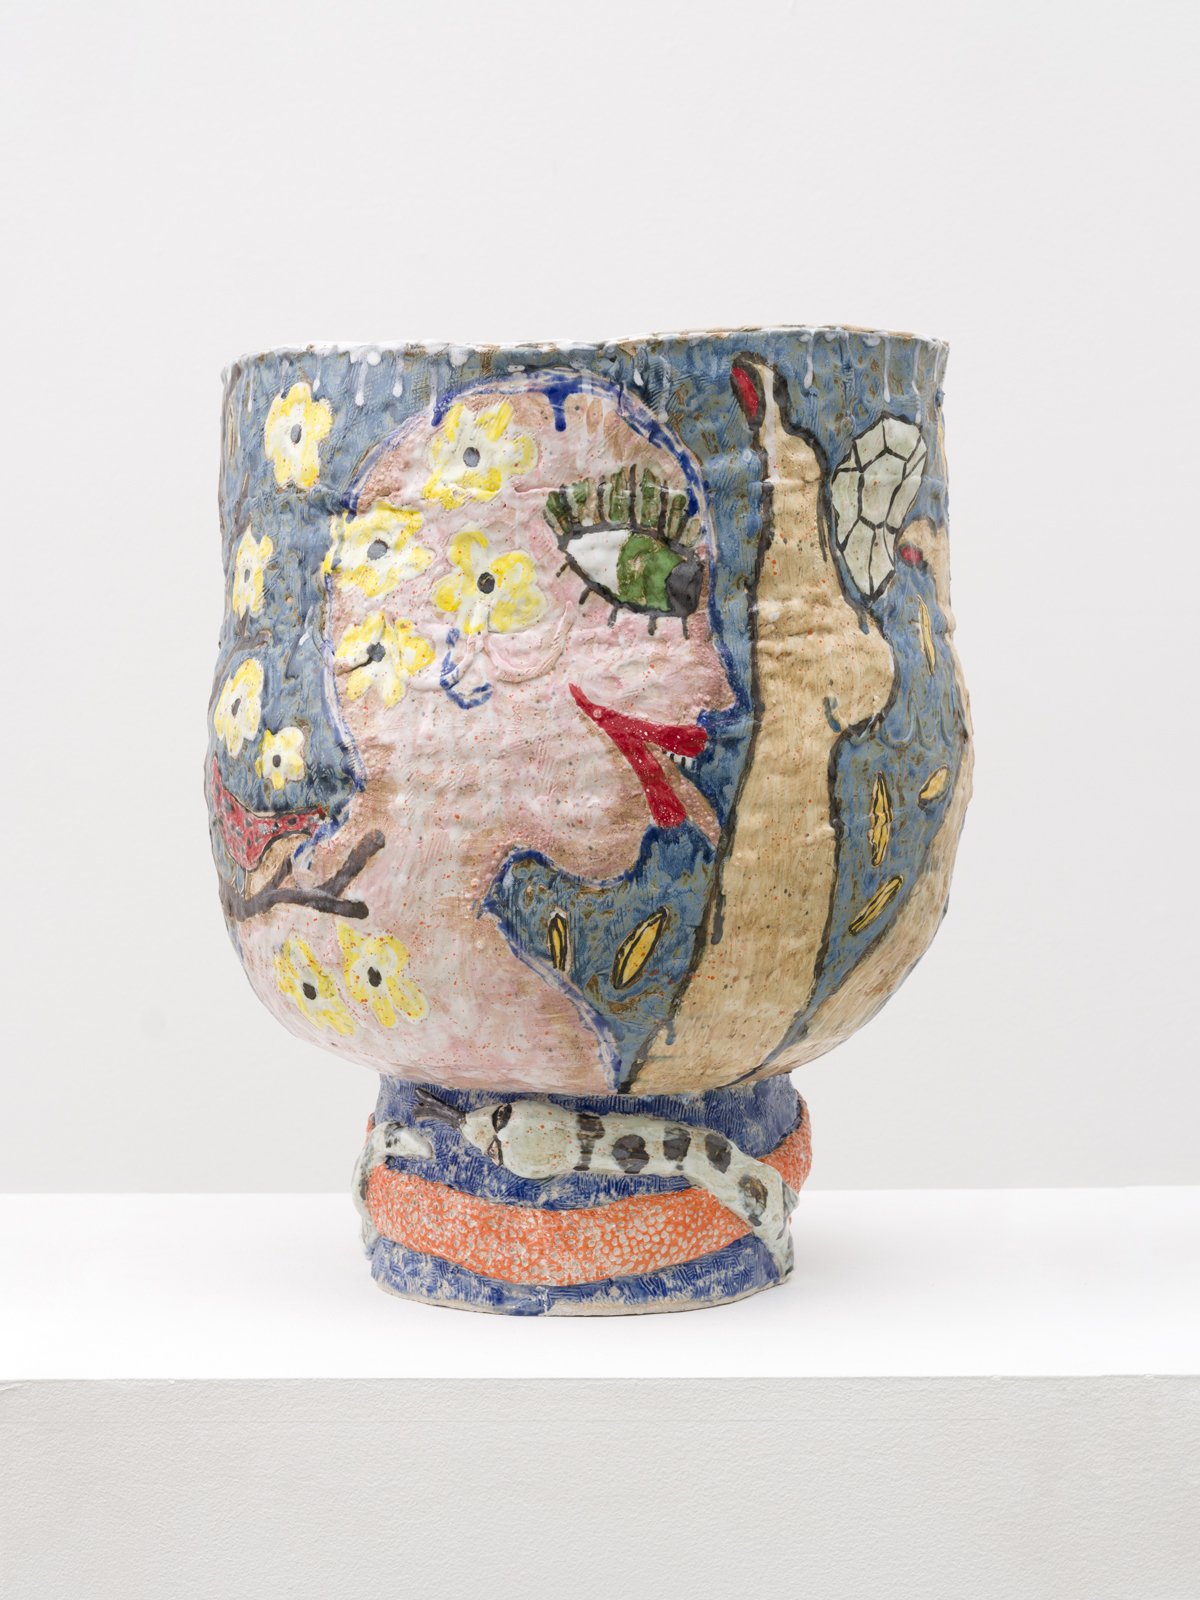  Jennifer King  There will be perils at every juncture, 2023  Glazed ceramic  18½ x 15 x 15 in. 